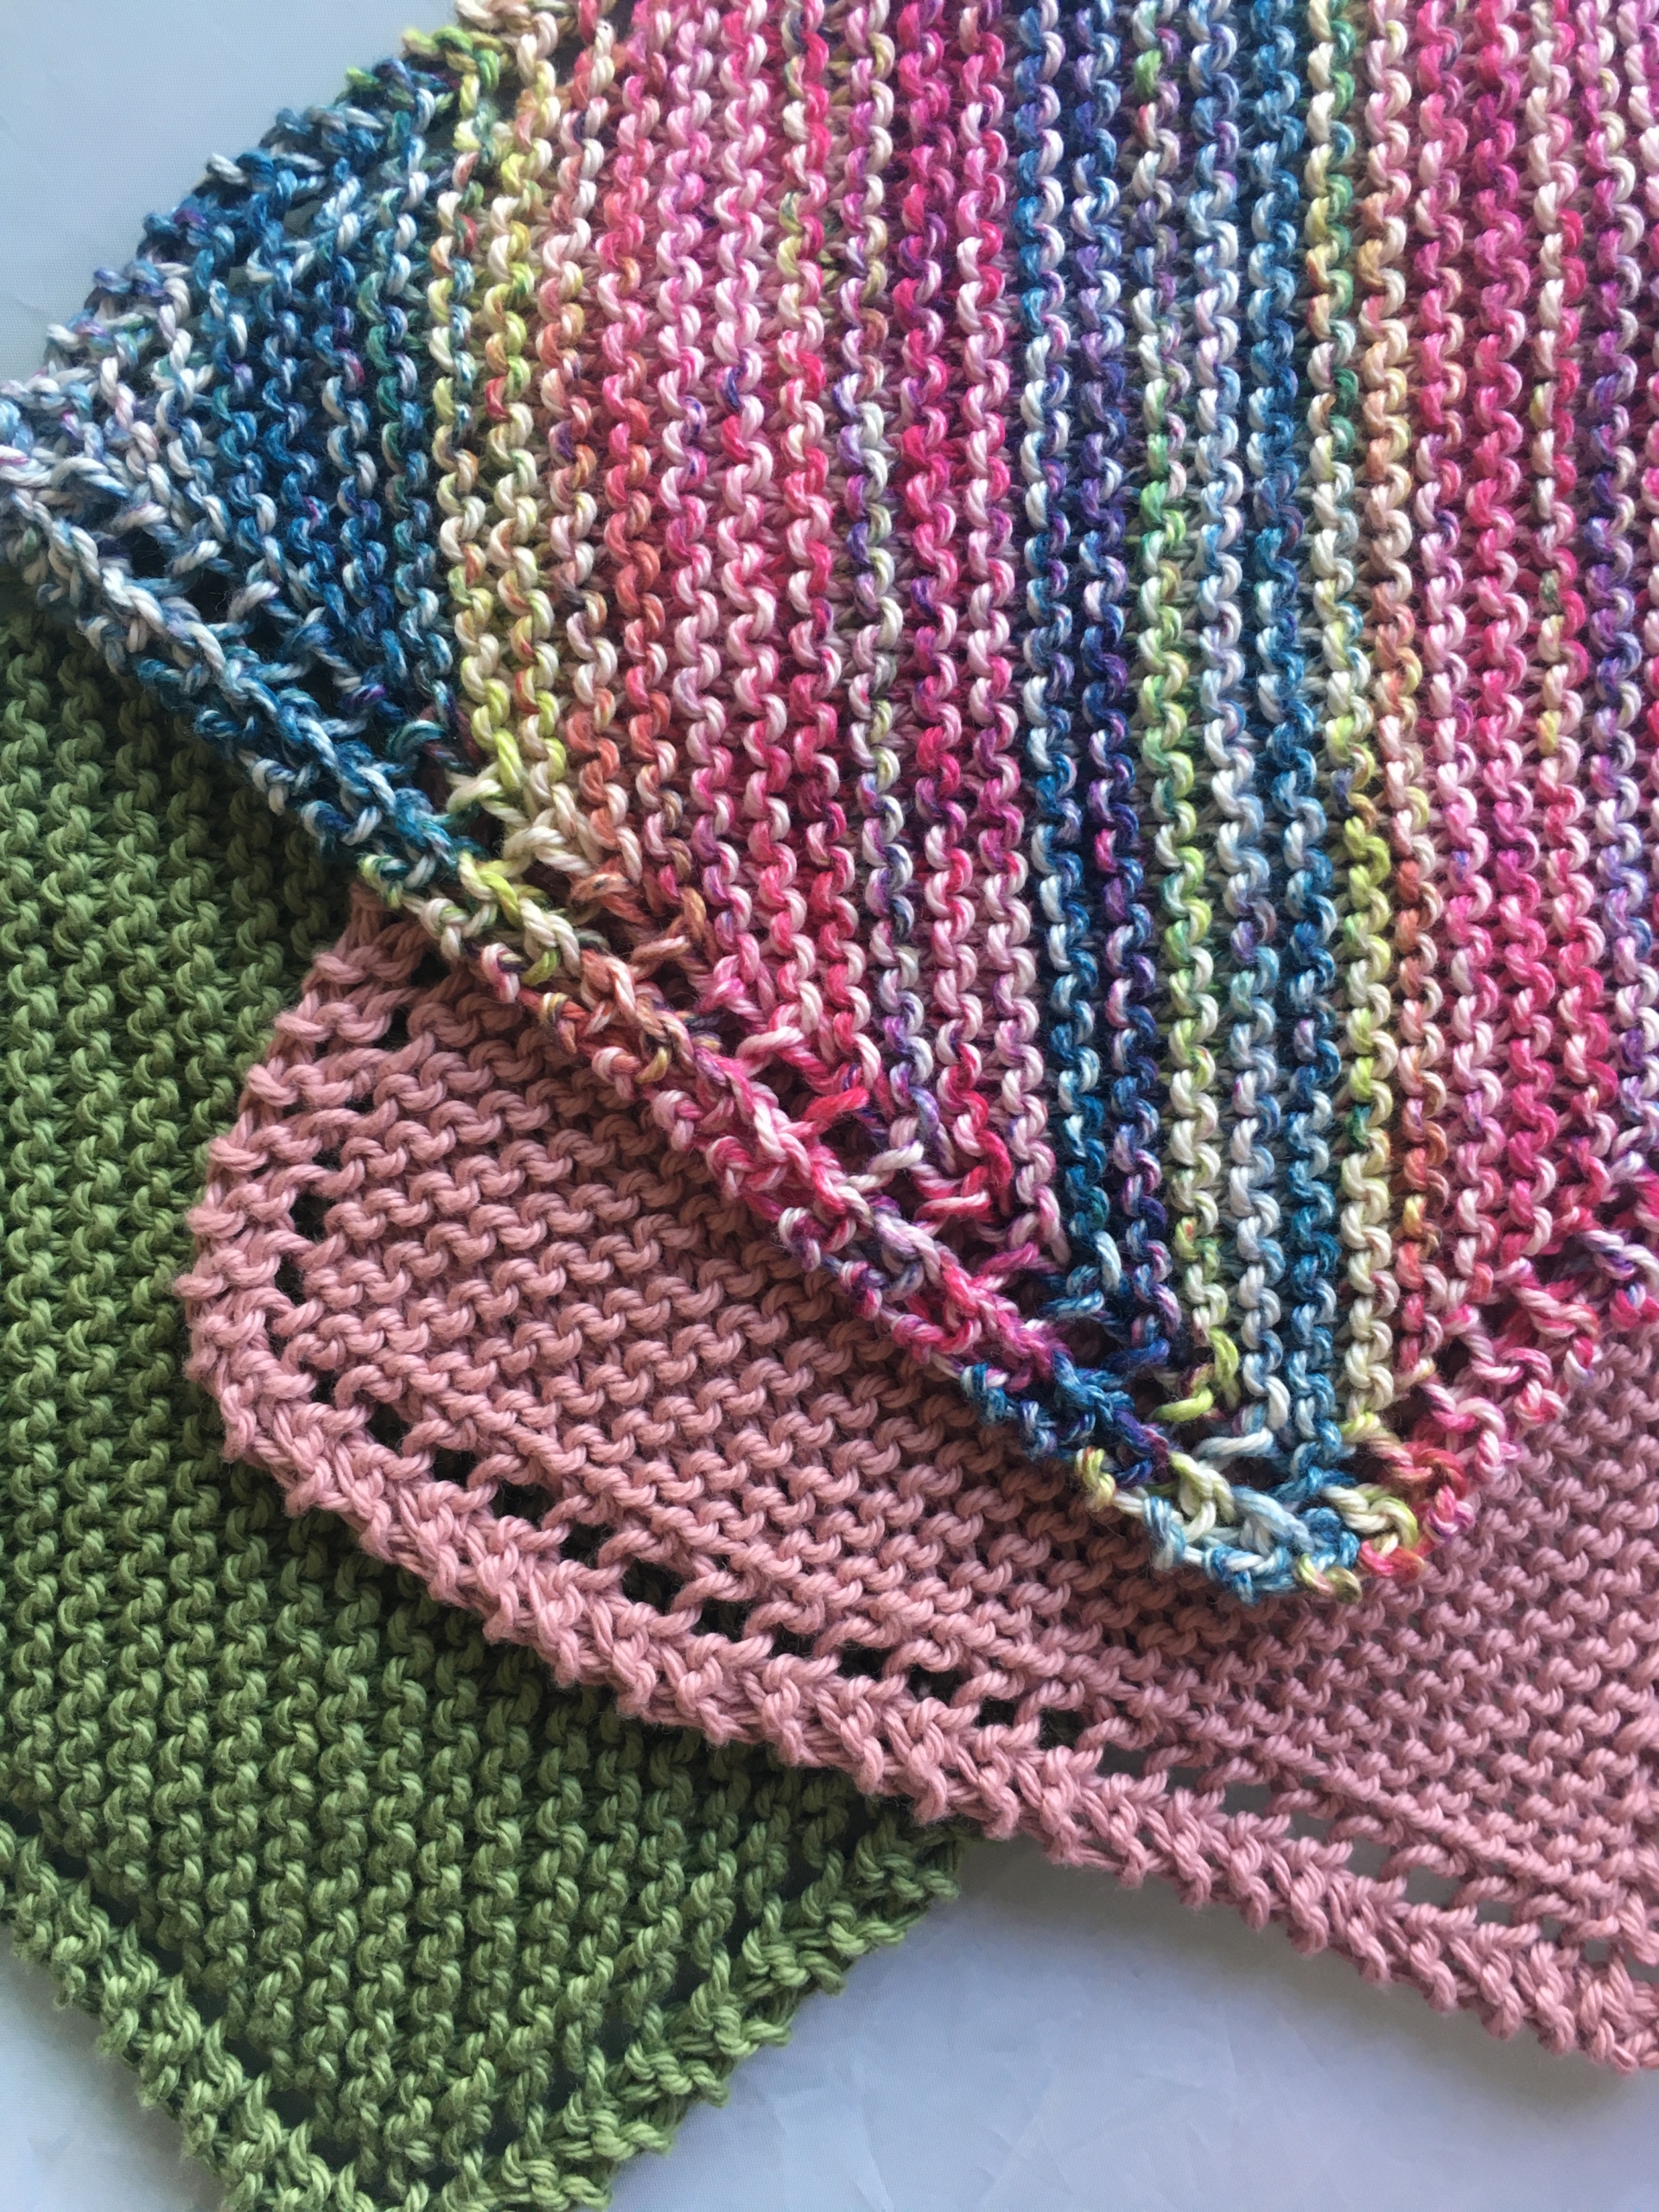 https://www.sixcleversisters.com/wp-content/uploads/2020/11/The-Easiest-Knit-Dishcloth-free-pattern-that-is-great-for-a-beginner_18-scaled.jpg